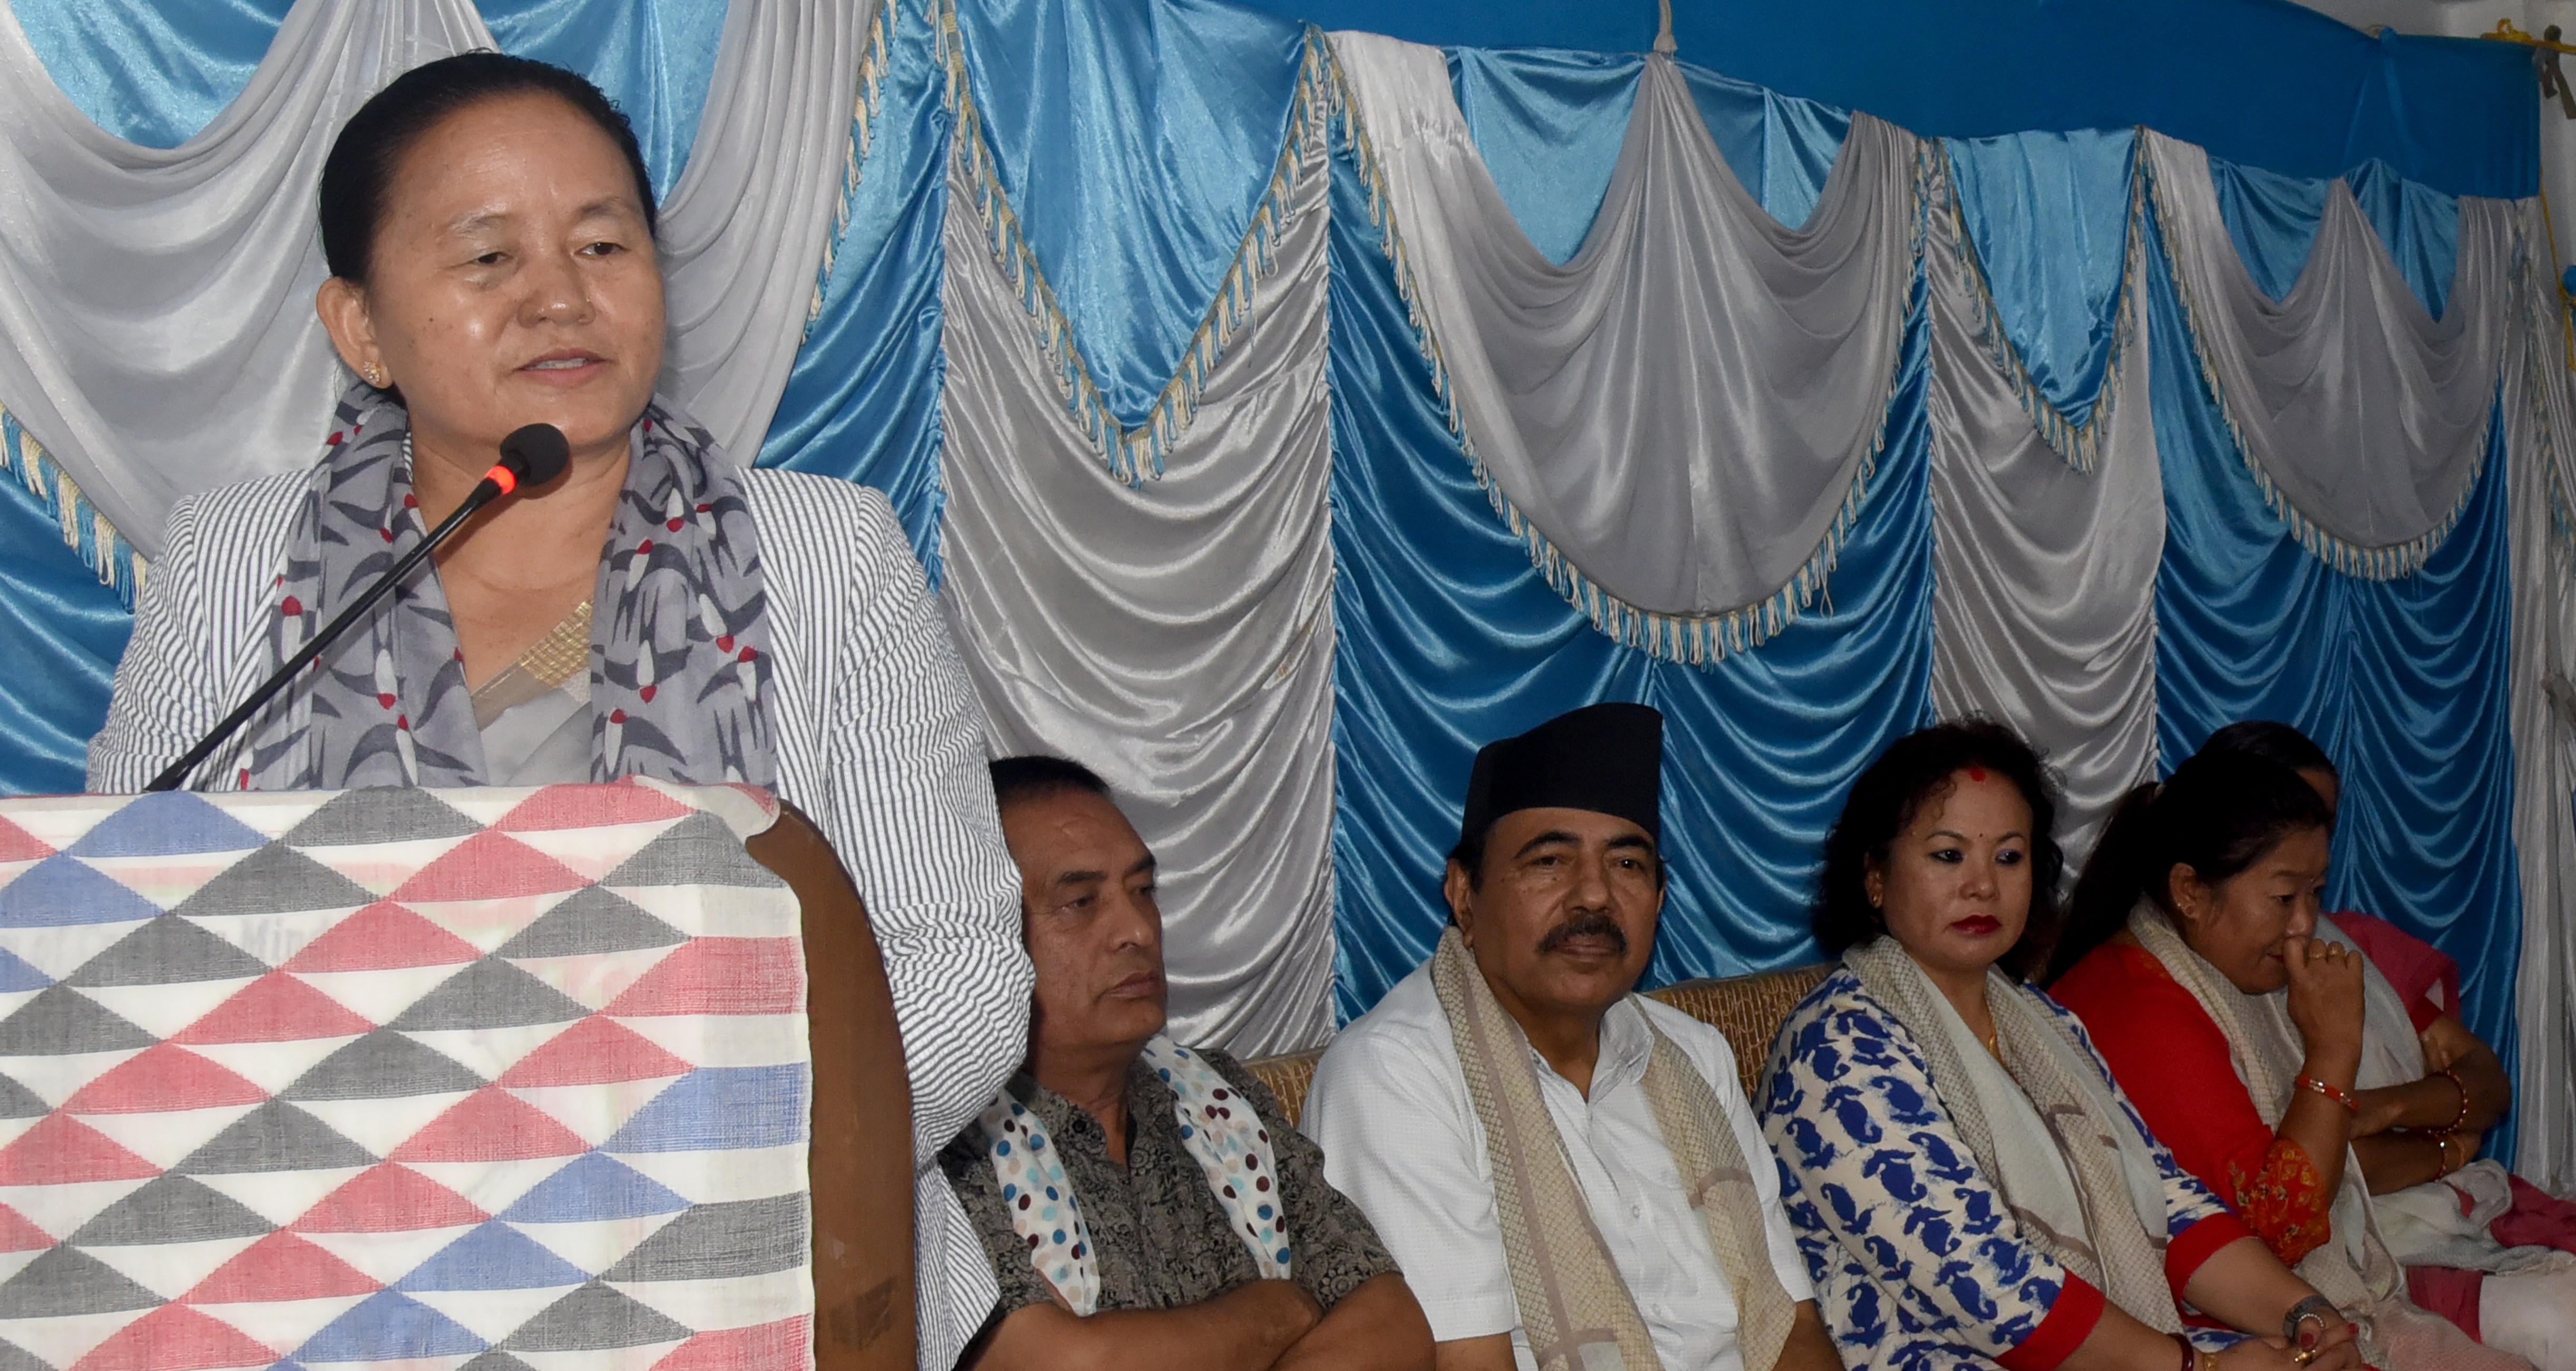 womens-work-not-properly-evaluated-minister-thapa